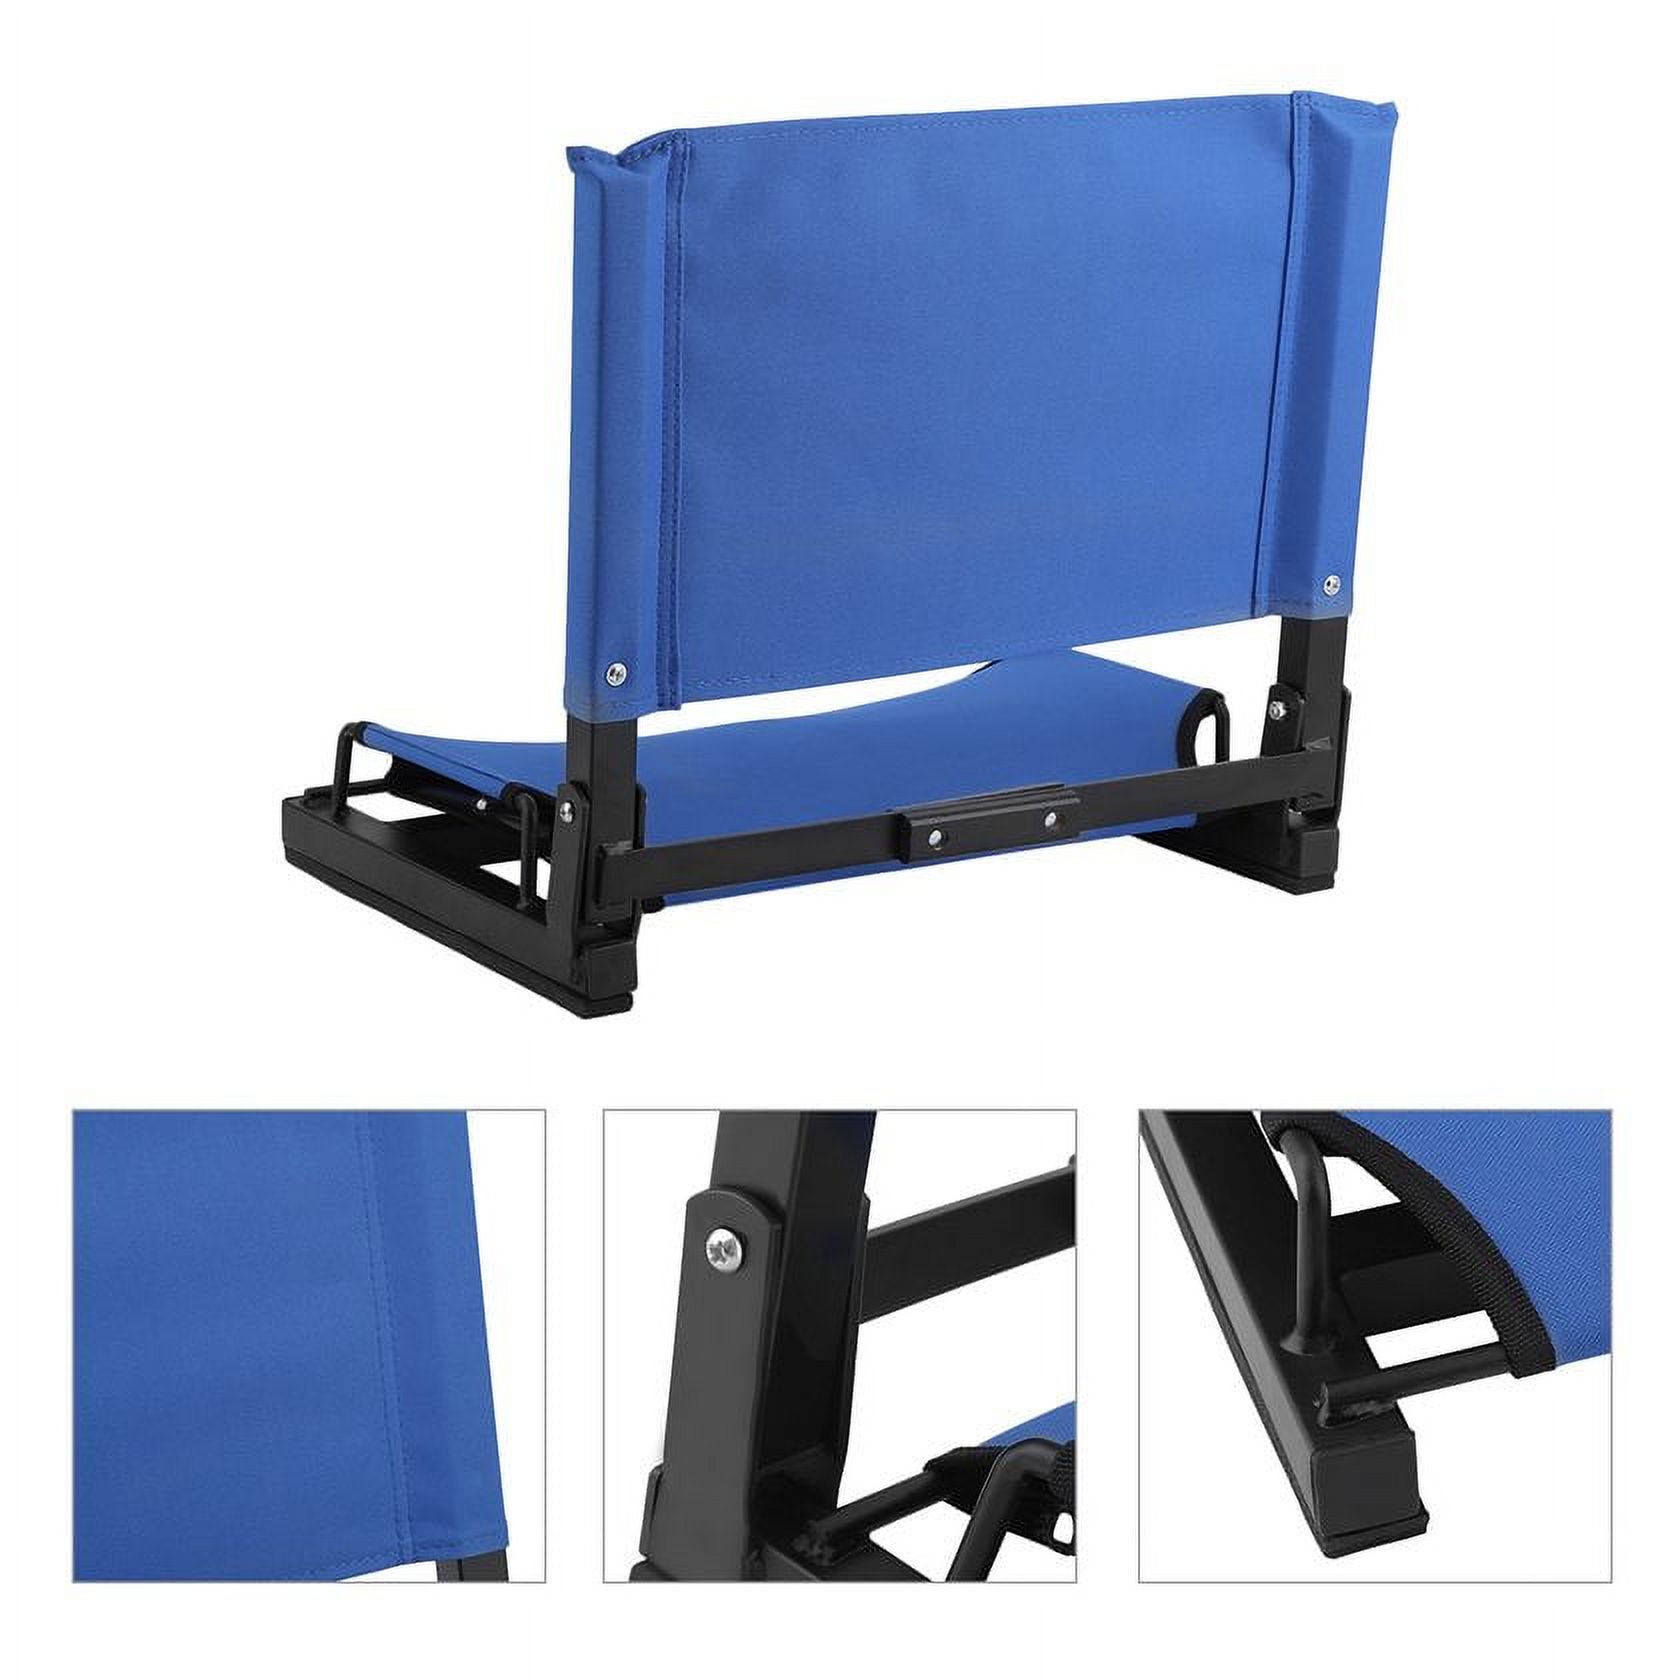 Bleacher Seats With Backs And Cushion，Folding Portable Stadium Bleacher Cushion Chair Durable Padded Seat With Back - image 4 of 7